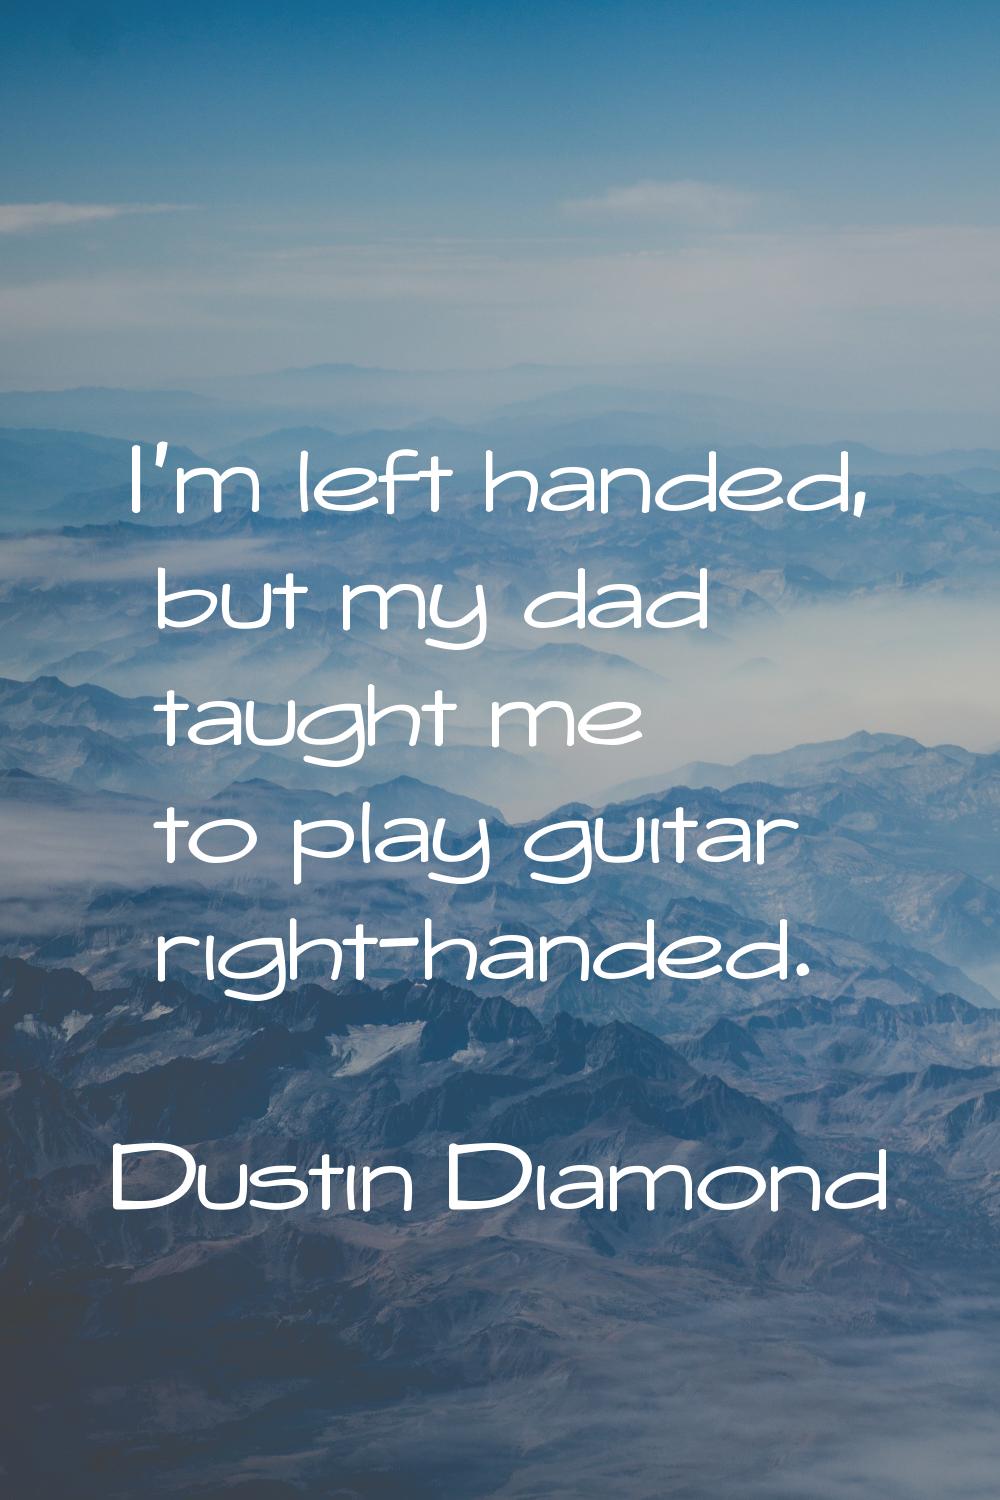 I'm left handed, but my dad taught me to play guitar right-handed.